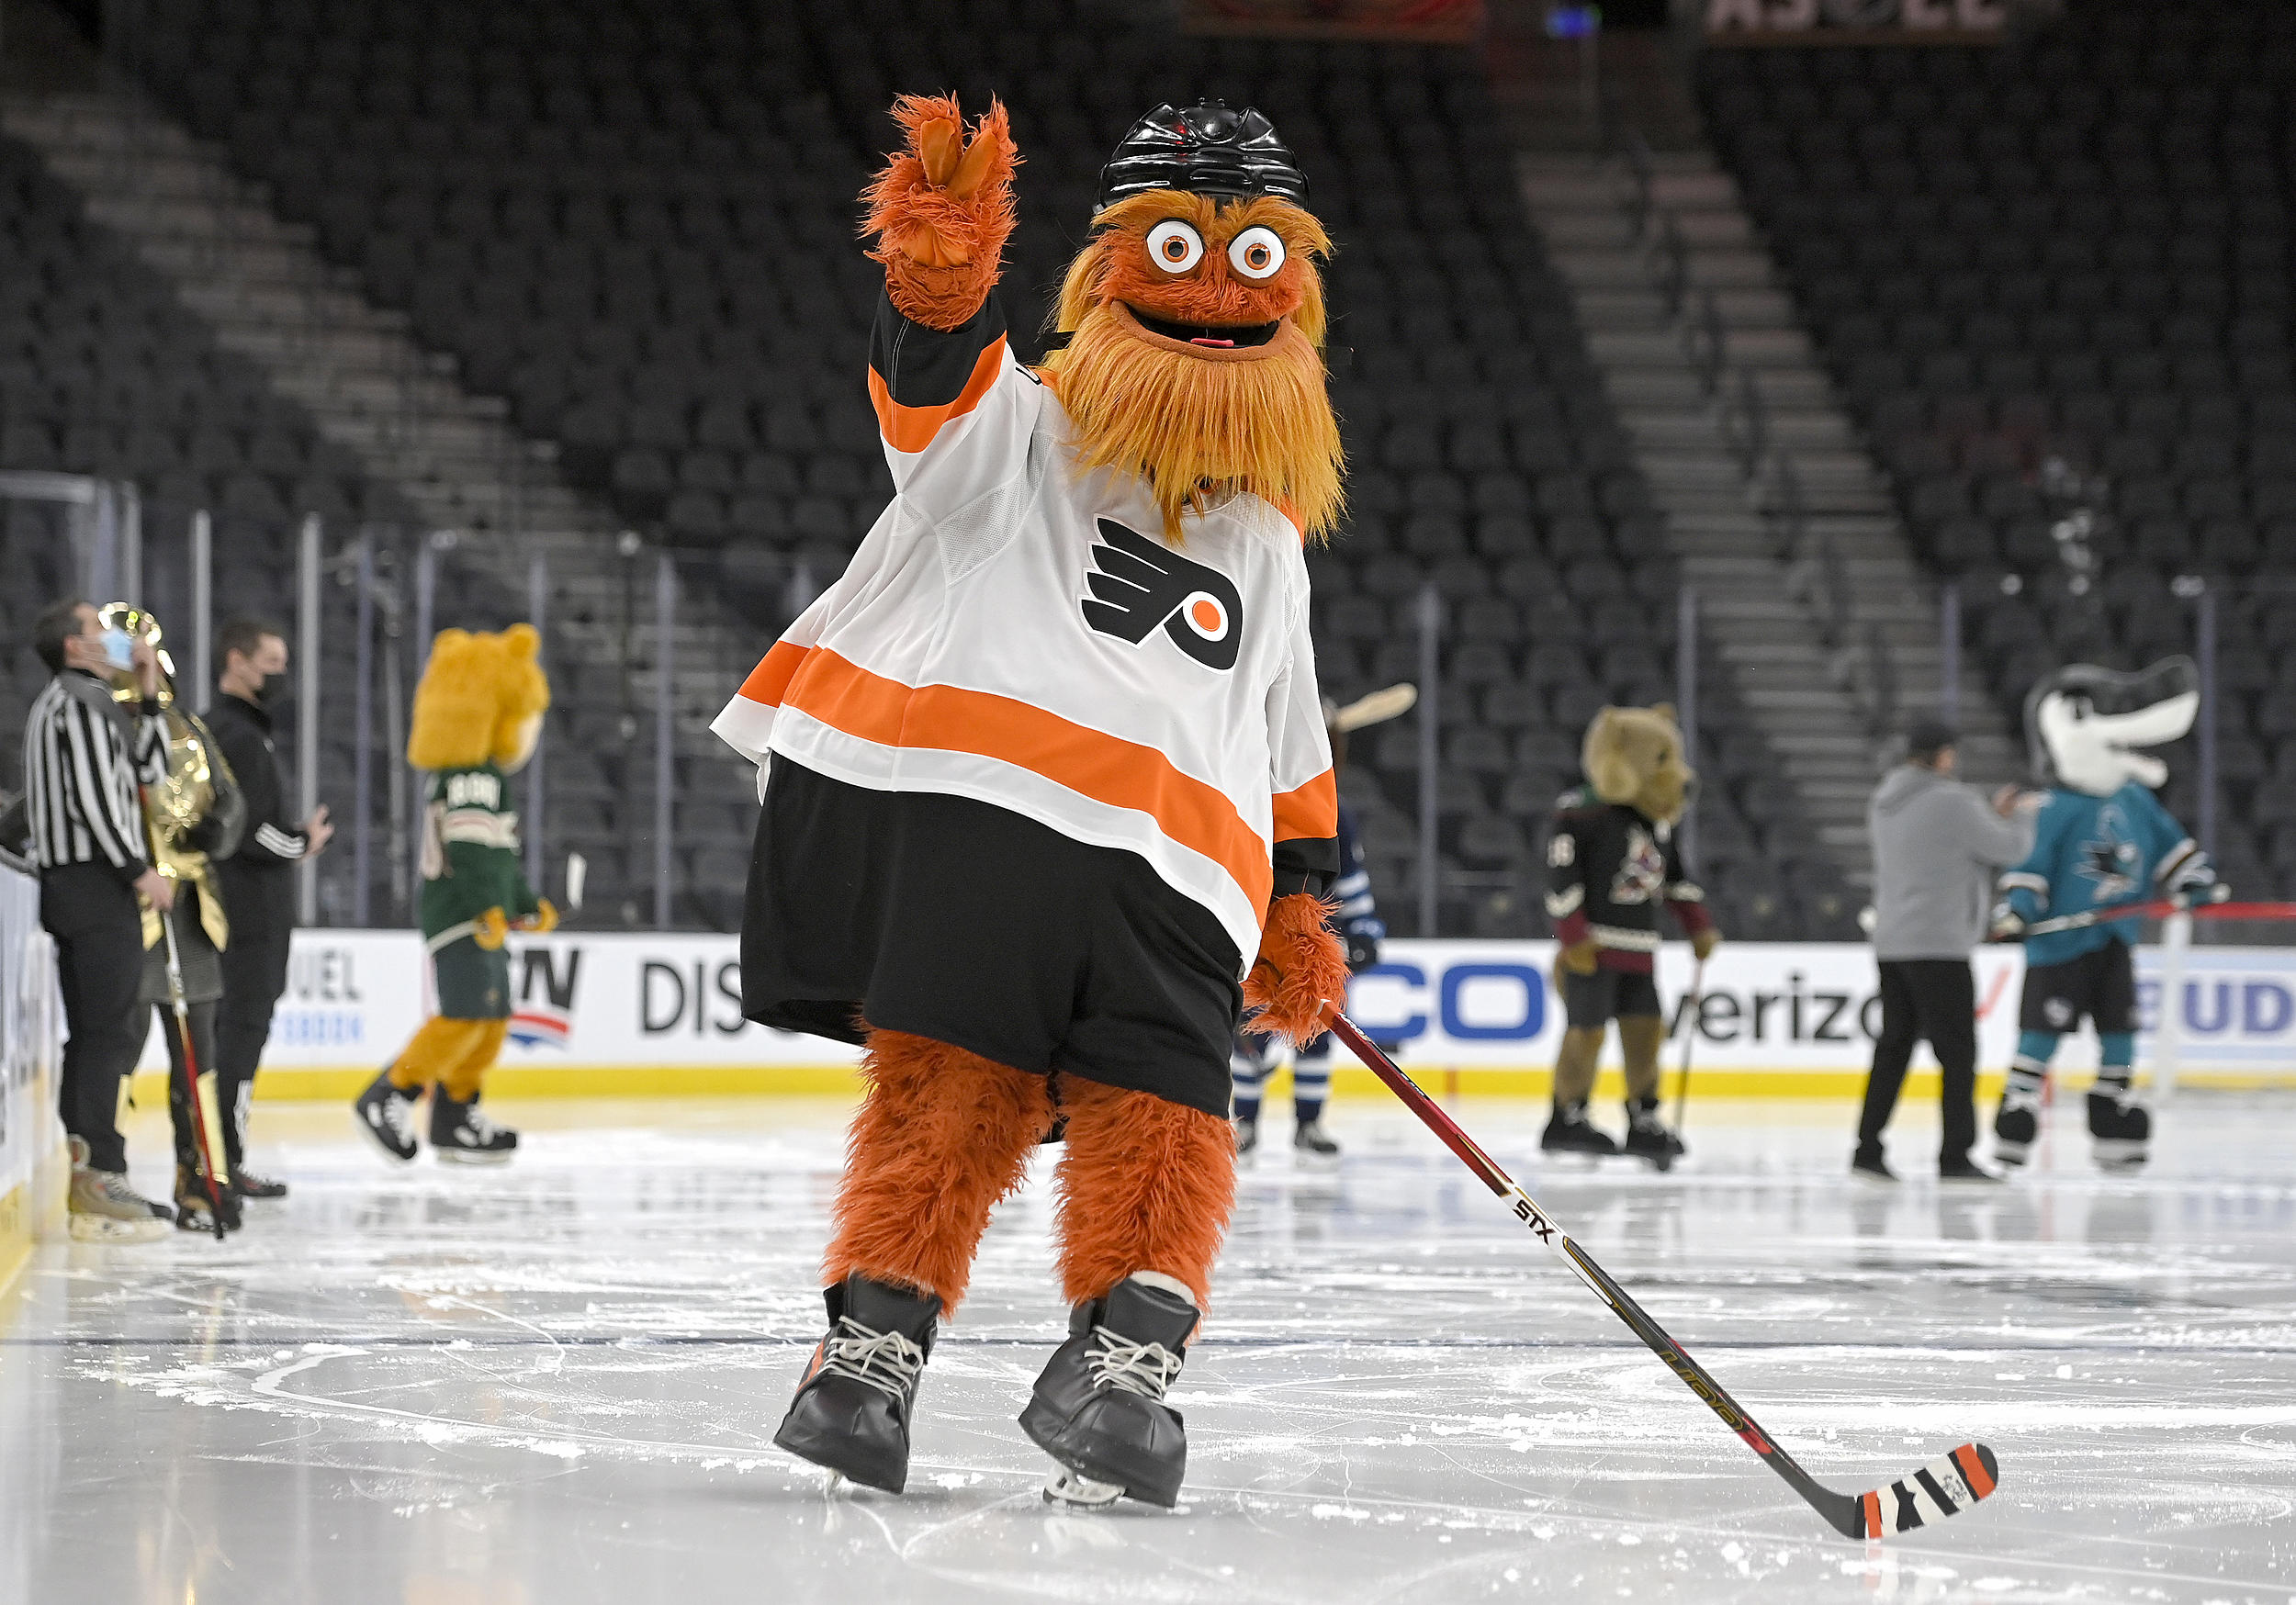 Despite Gritty's popularity, Flyers attendance is lowest in decades